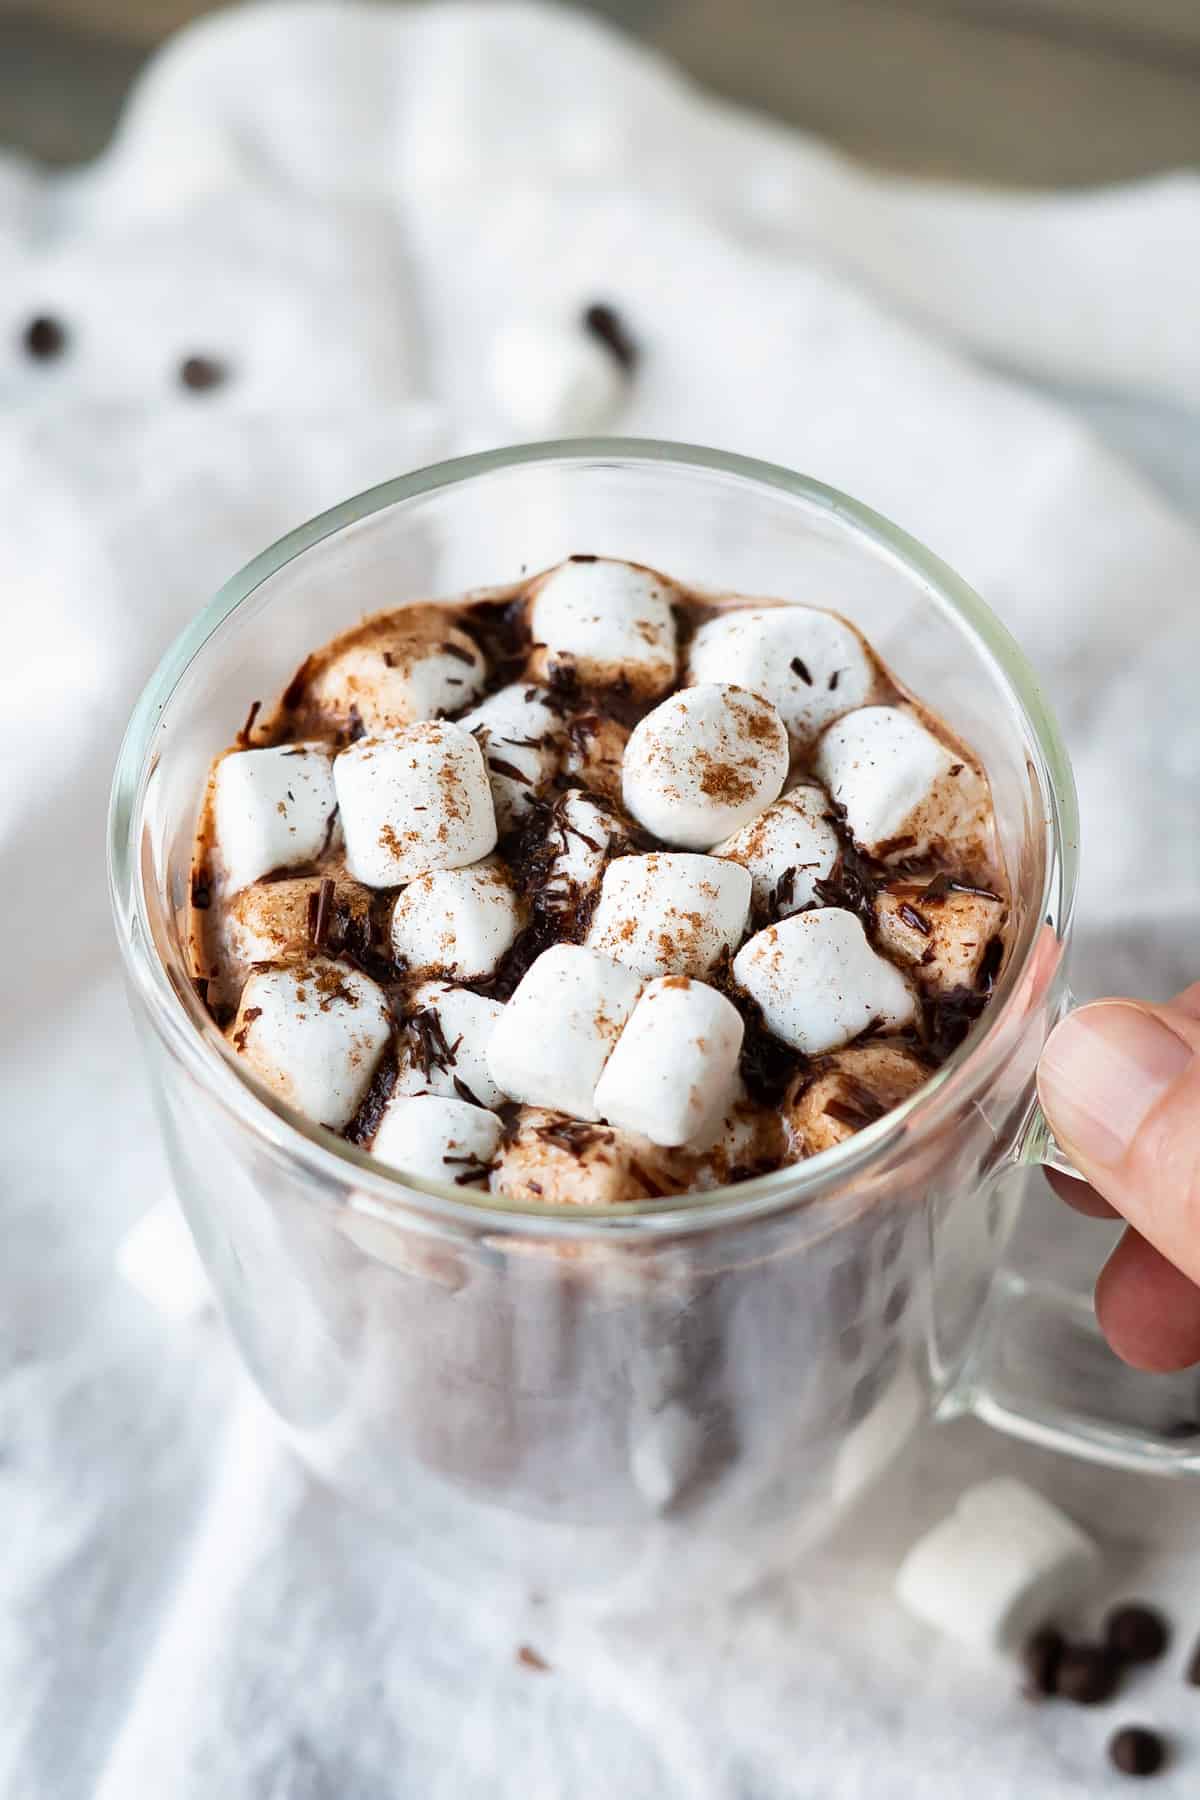 A glass mug full of hot chocolate topped with marshmallows, a sprinkle of cinnamon, and chocolate shavings.